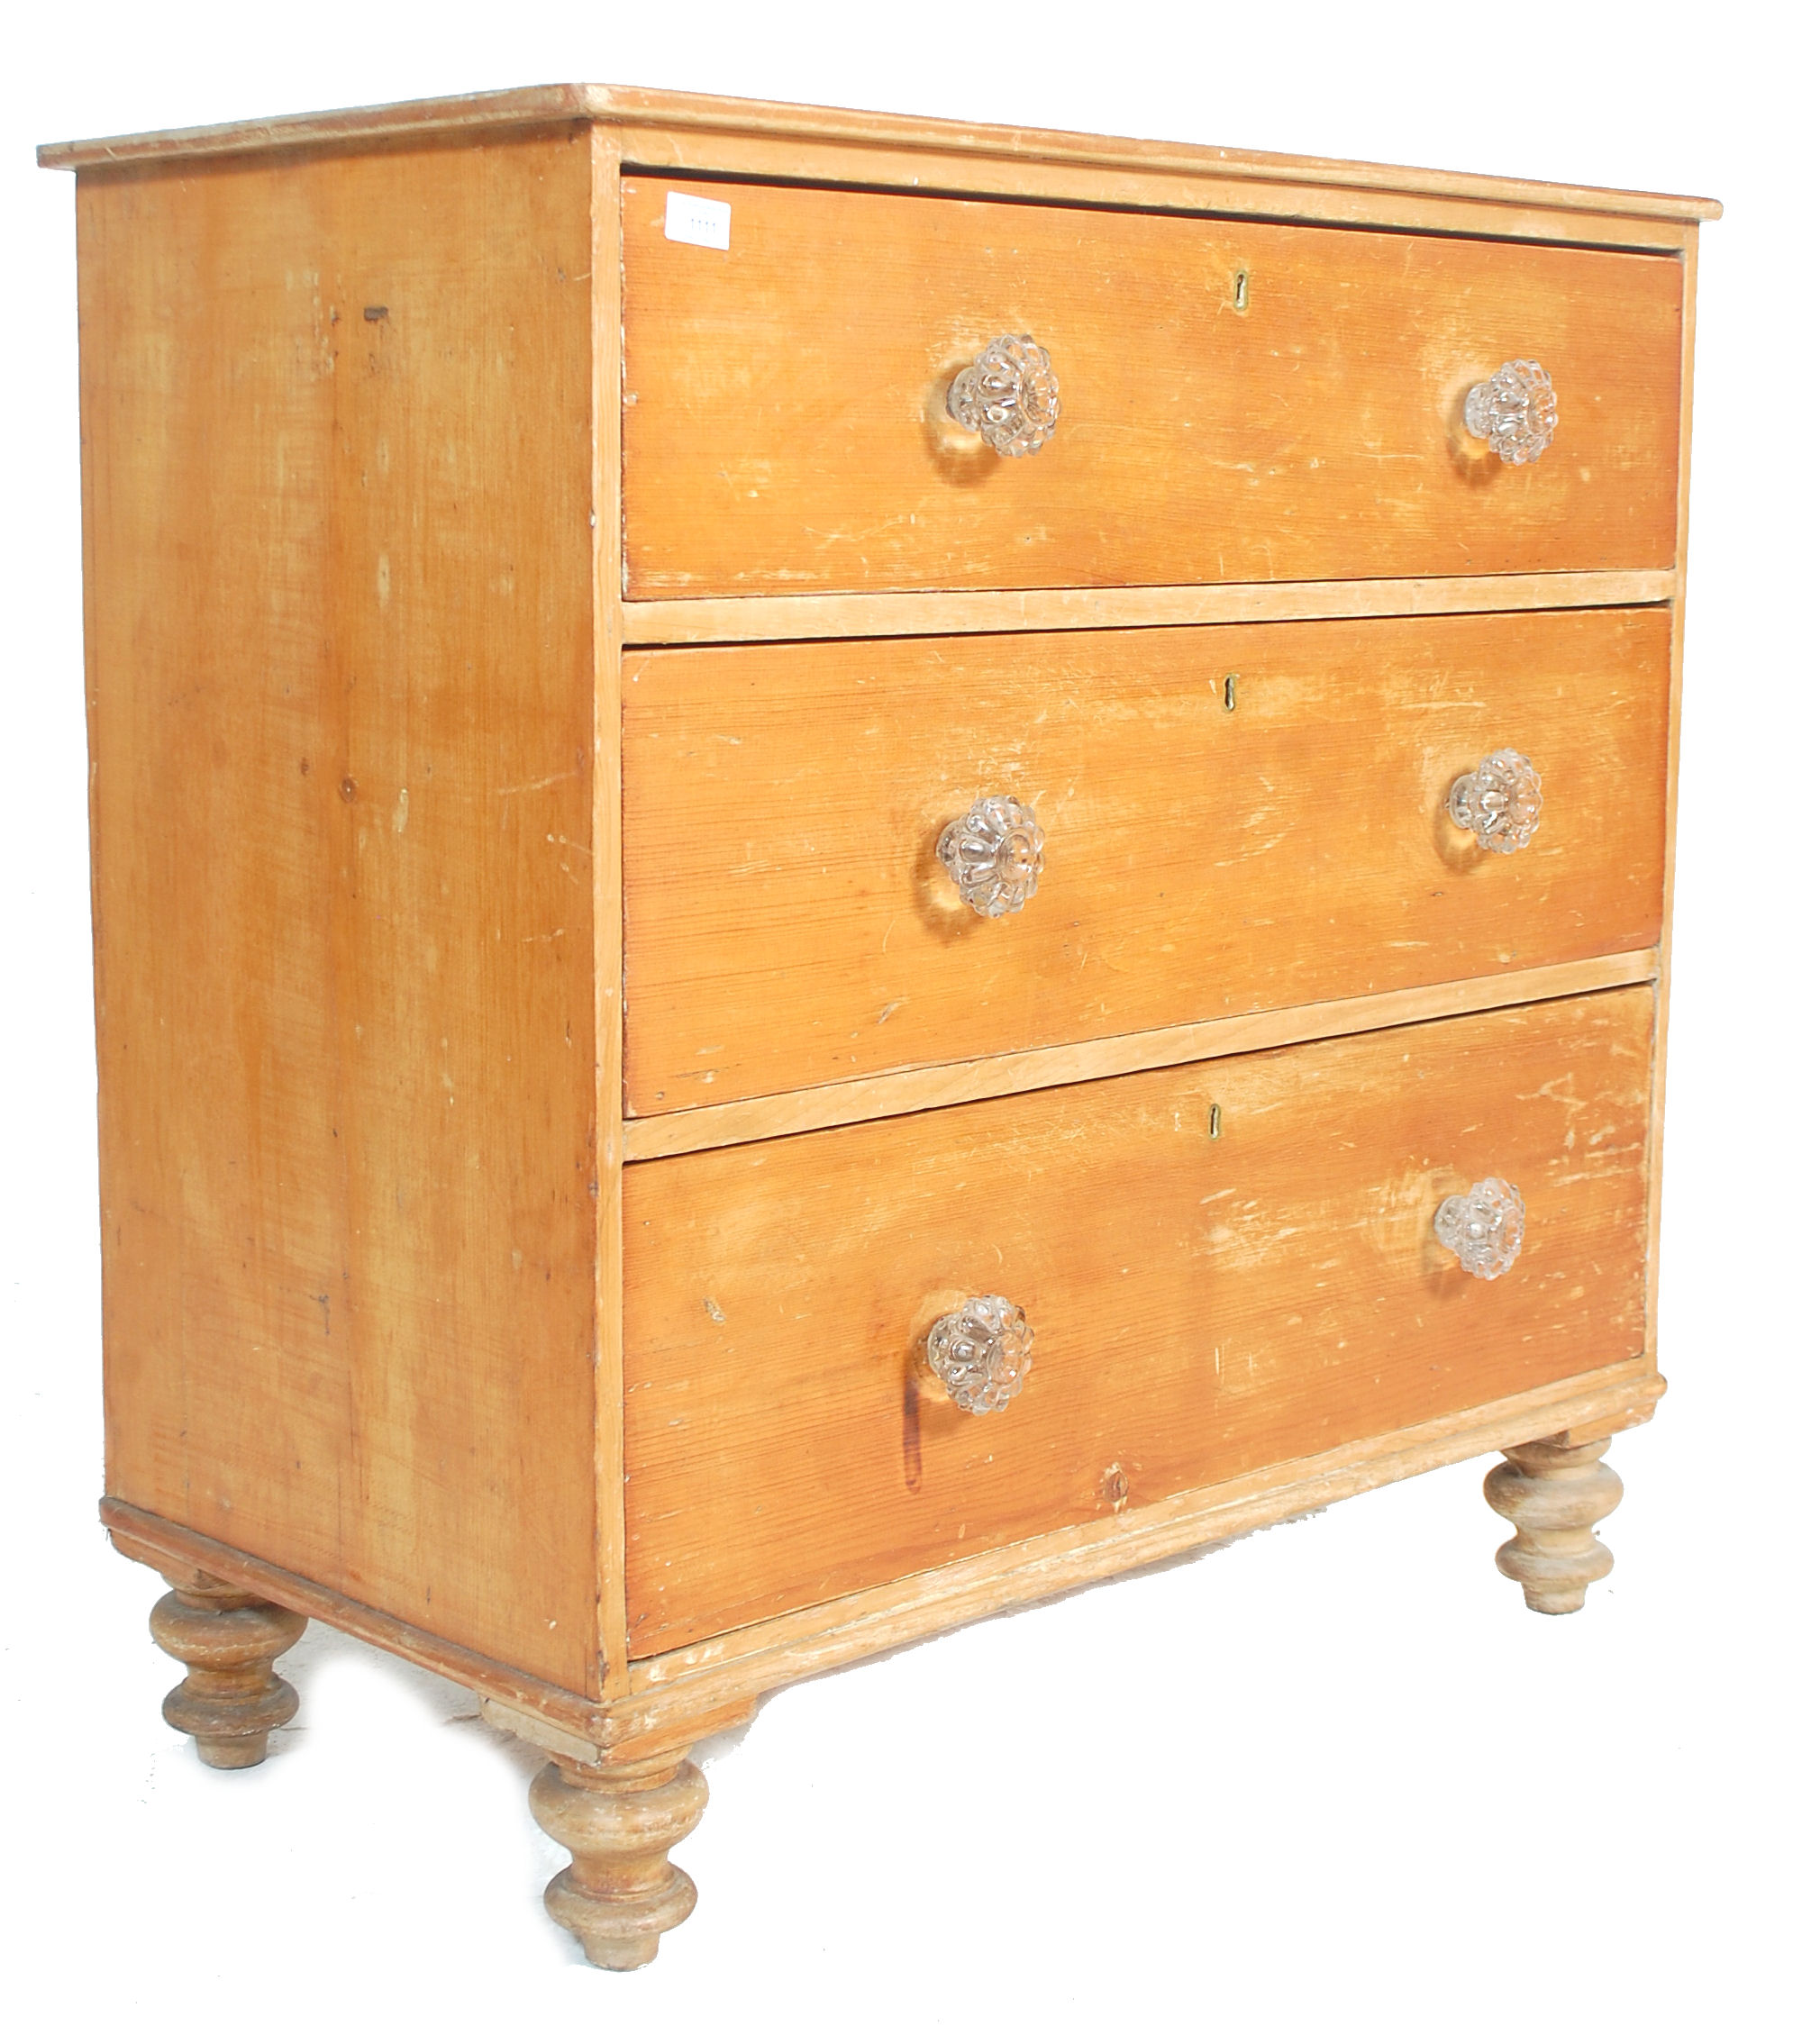 A Victorian pine cottage small chest of drawers being raised on bun feet with glass handles to the 3